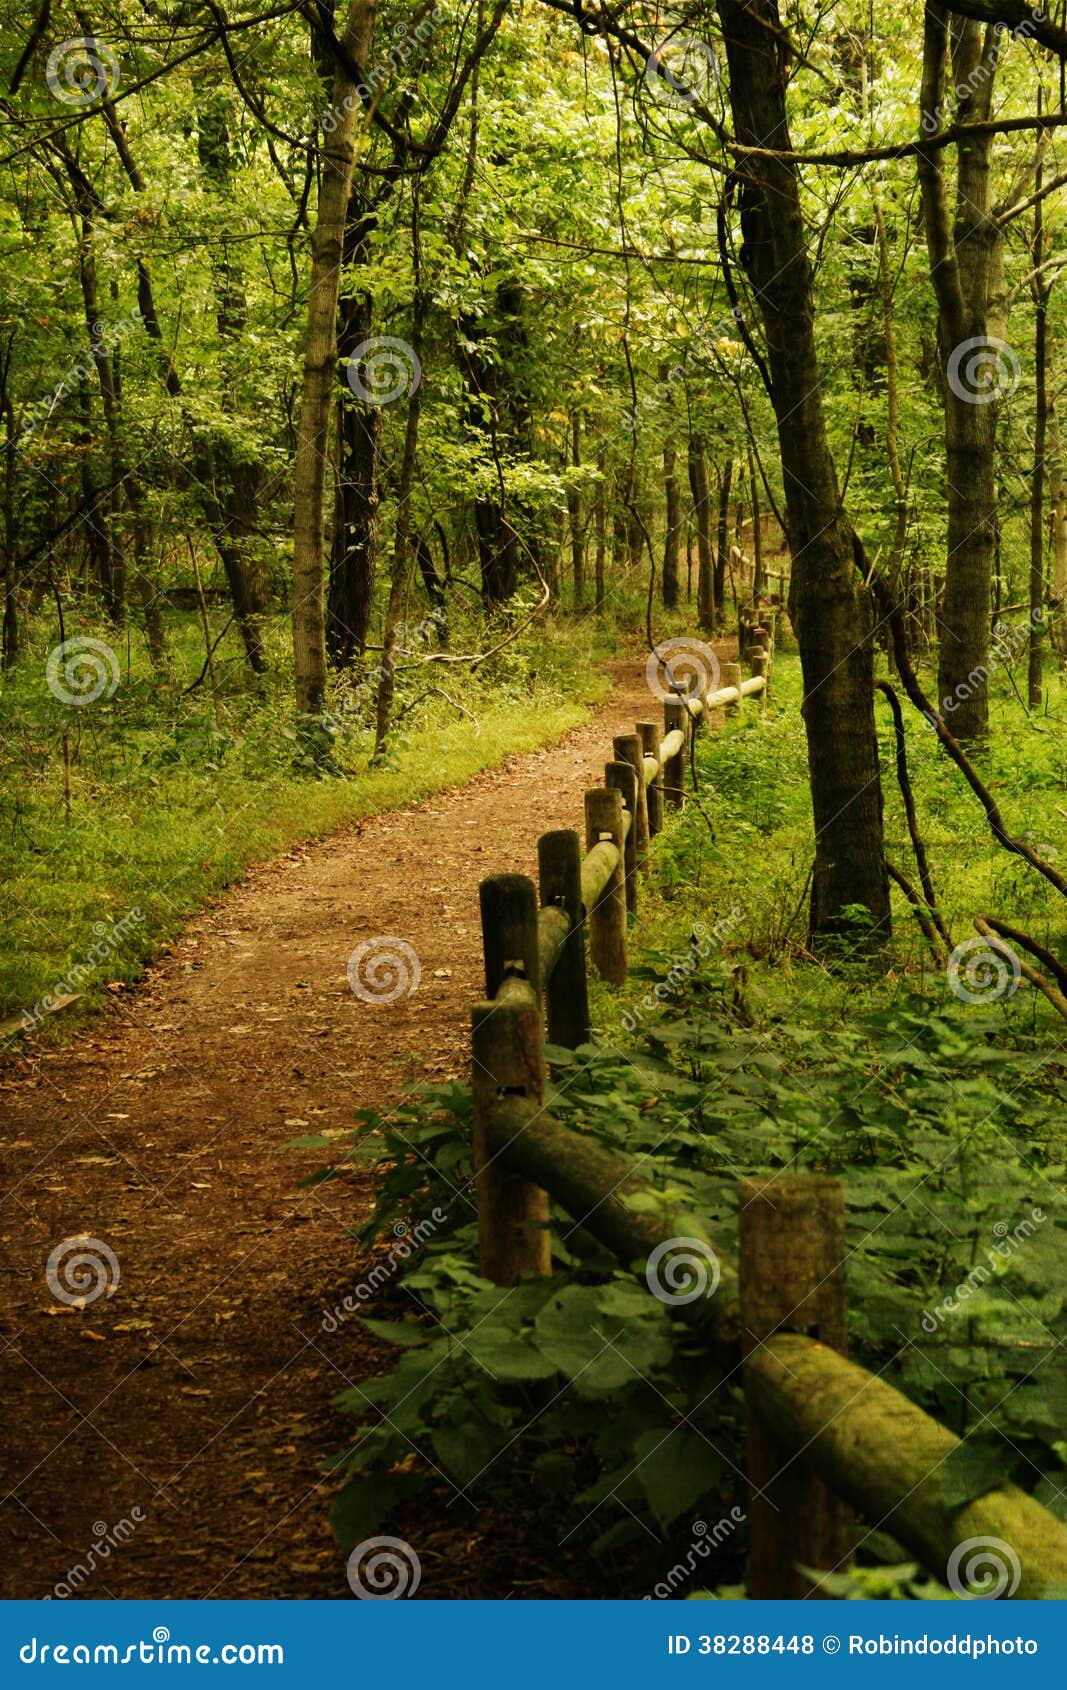 radnor lake in nashville tennessee,wooded fenced path in the forest